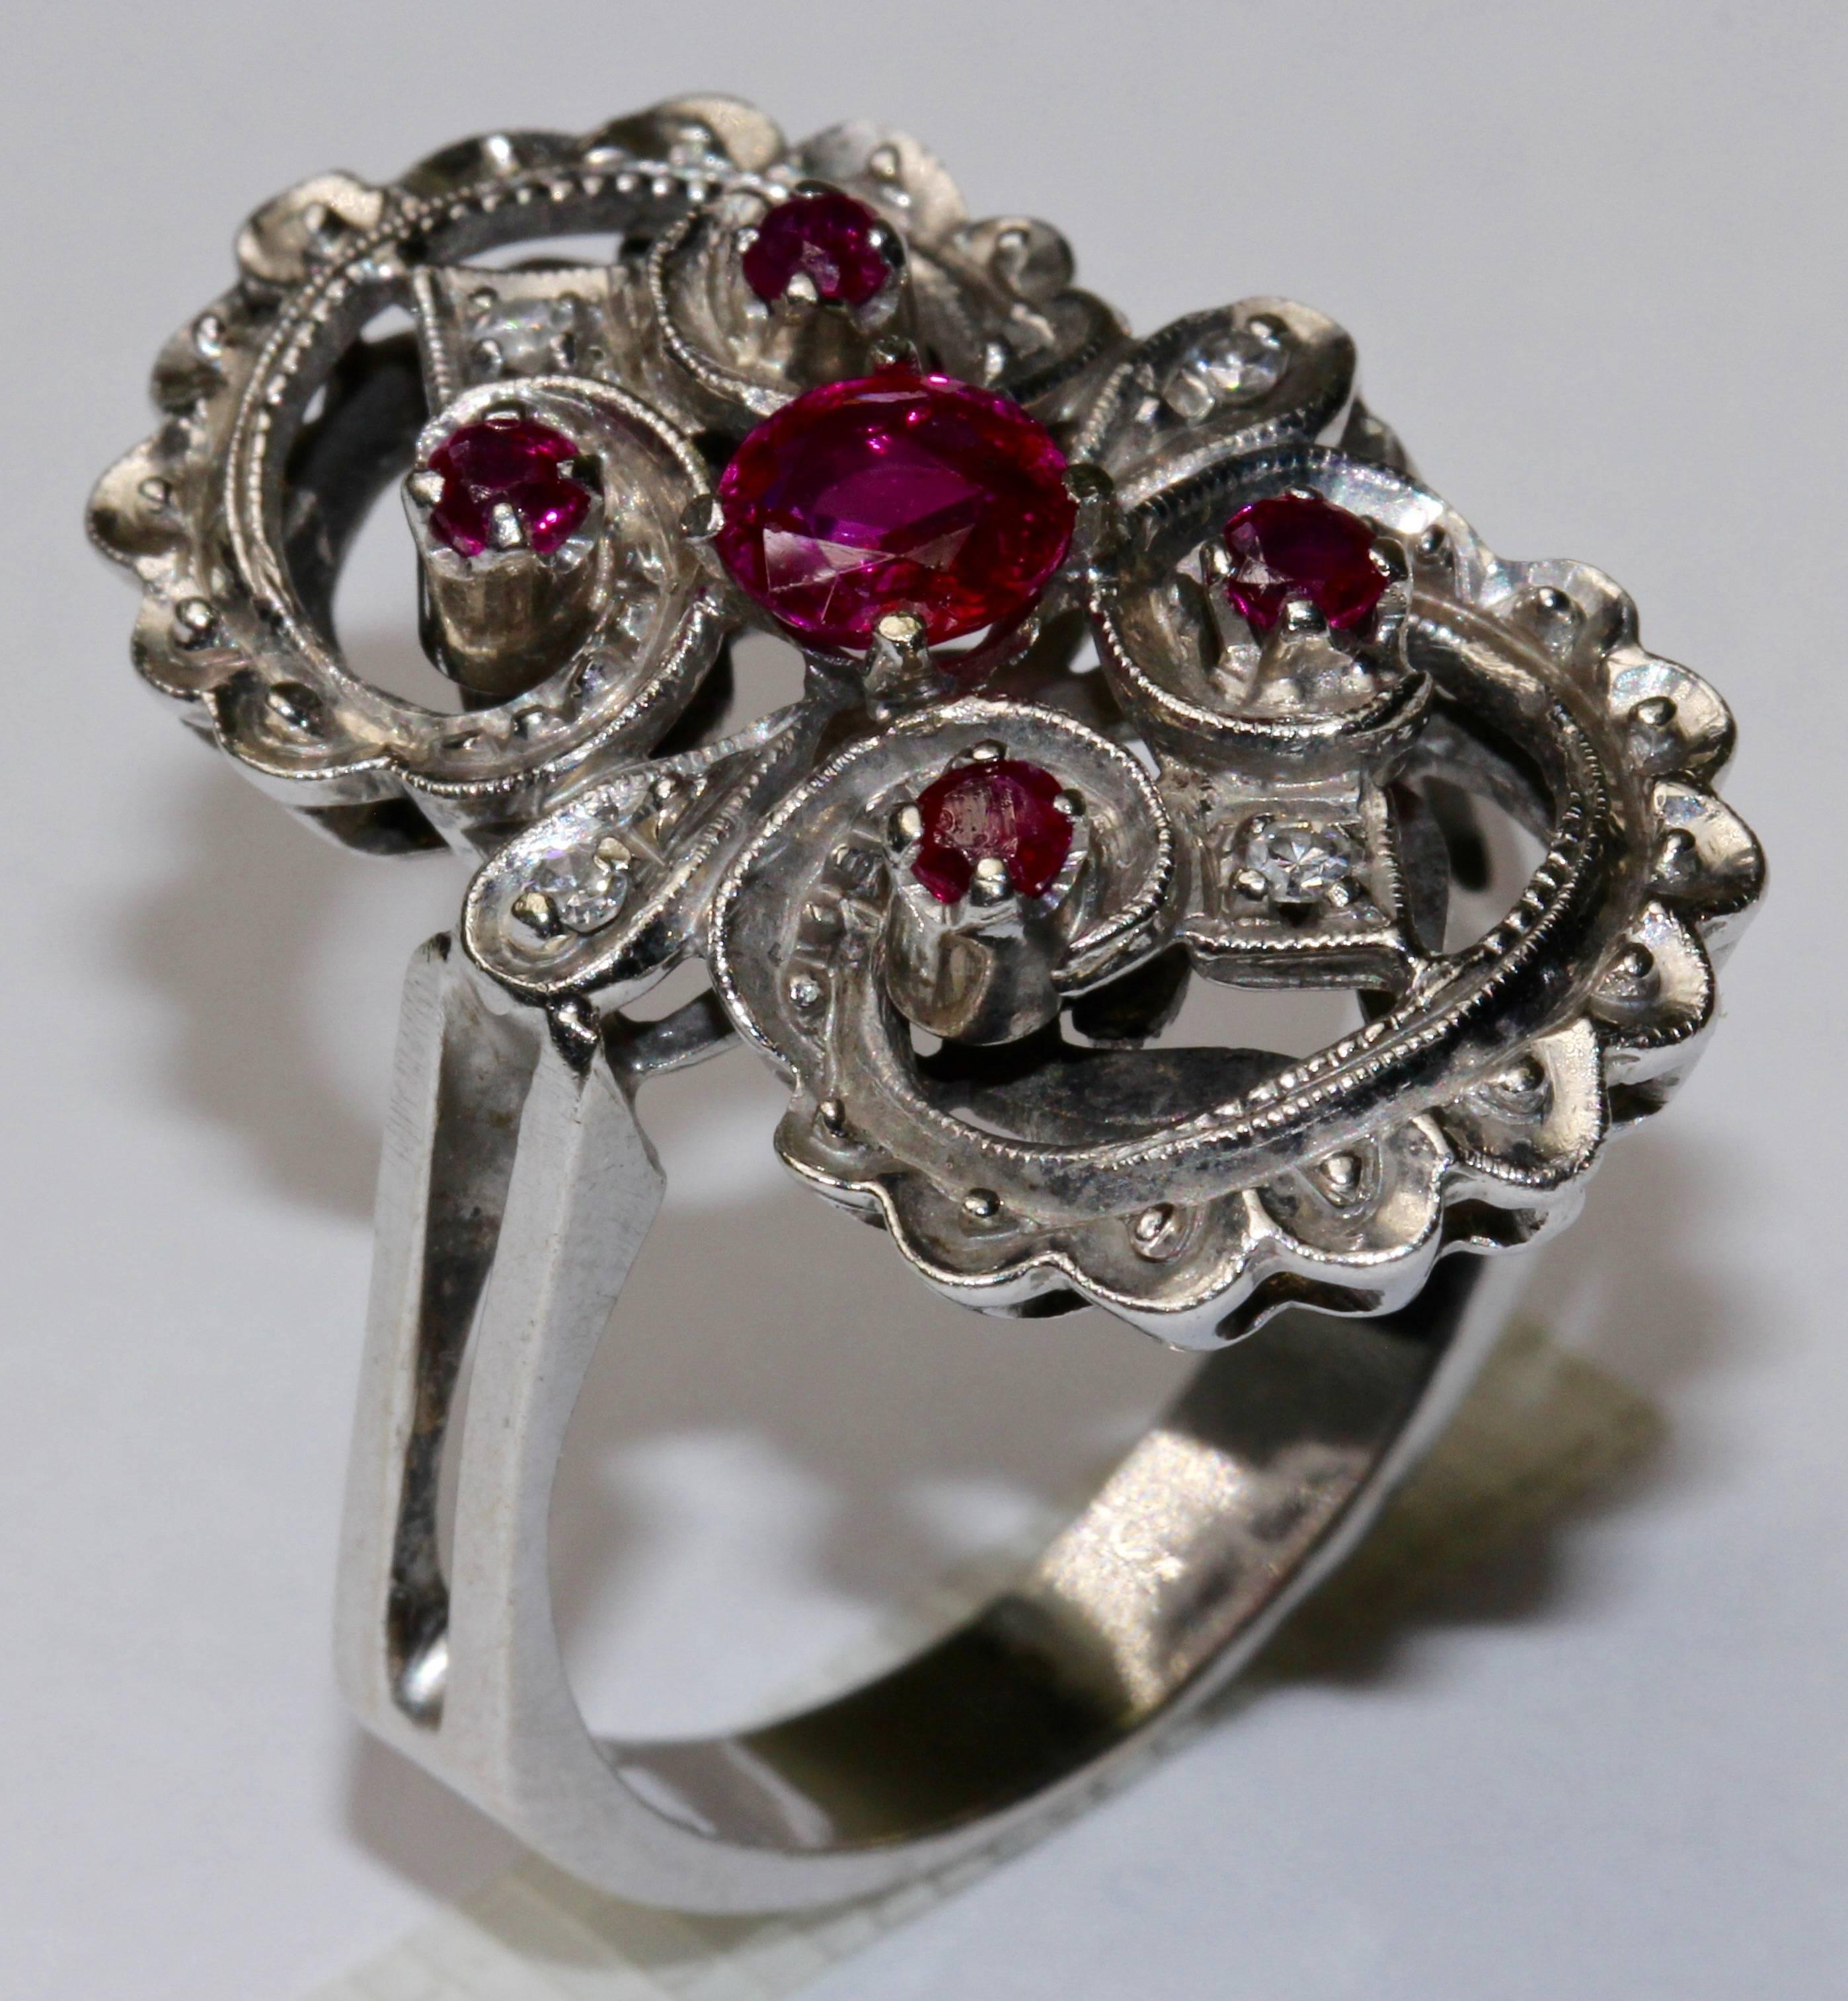 Women's 14K White Gold Ring Studded With Rubies And Diamonds For Sale